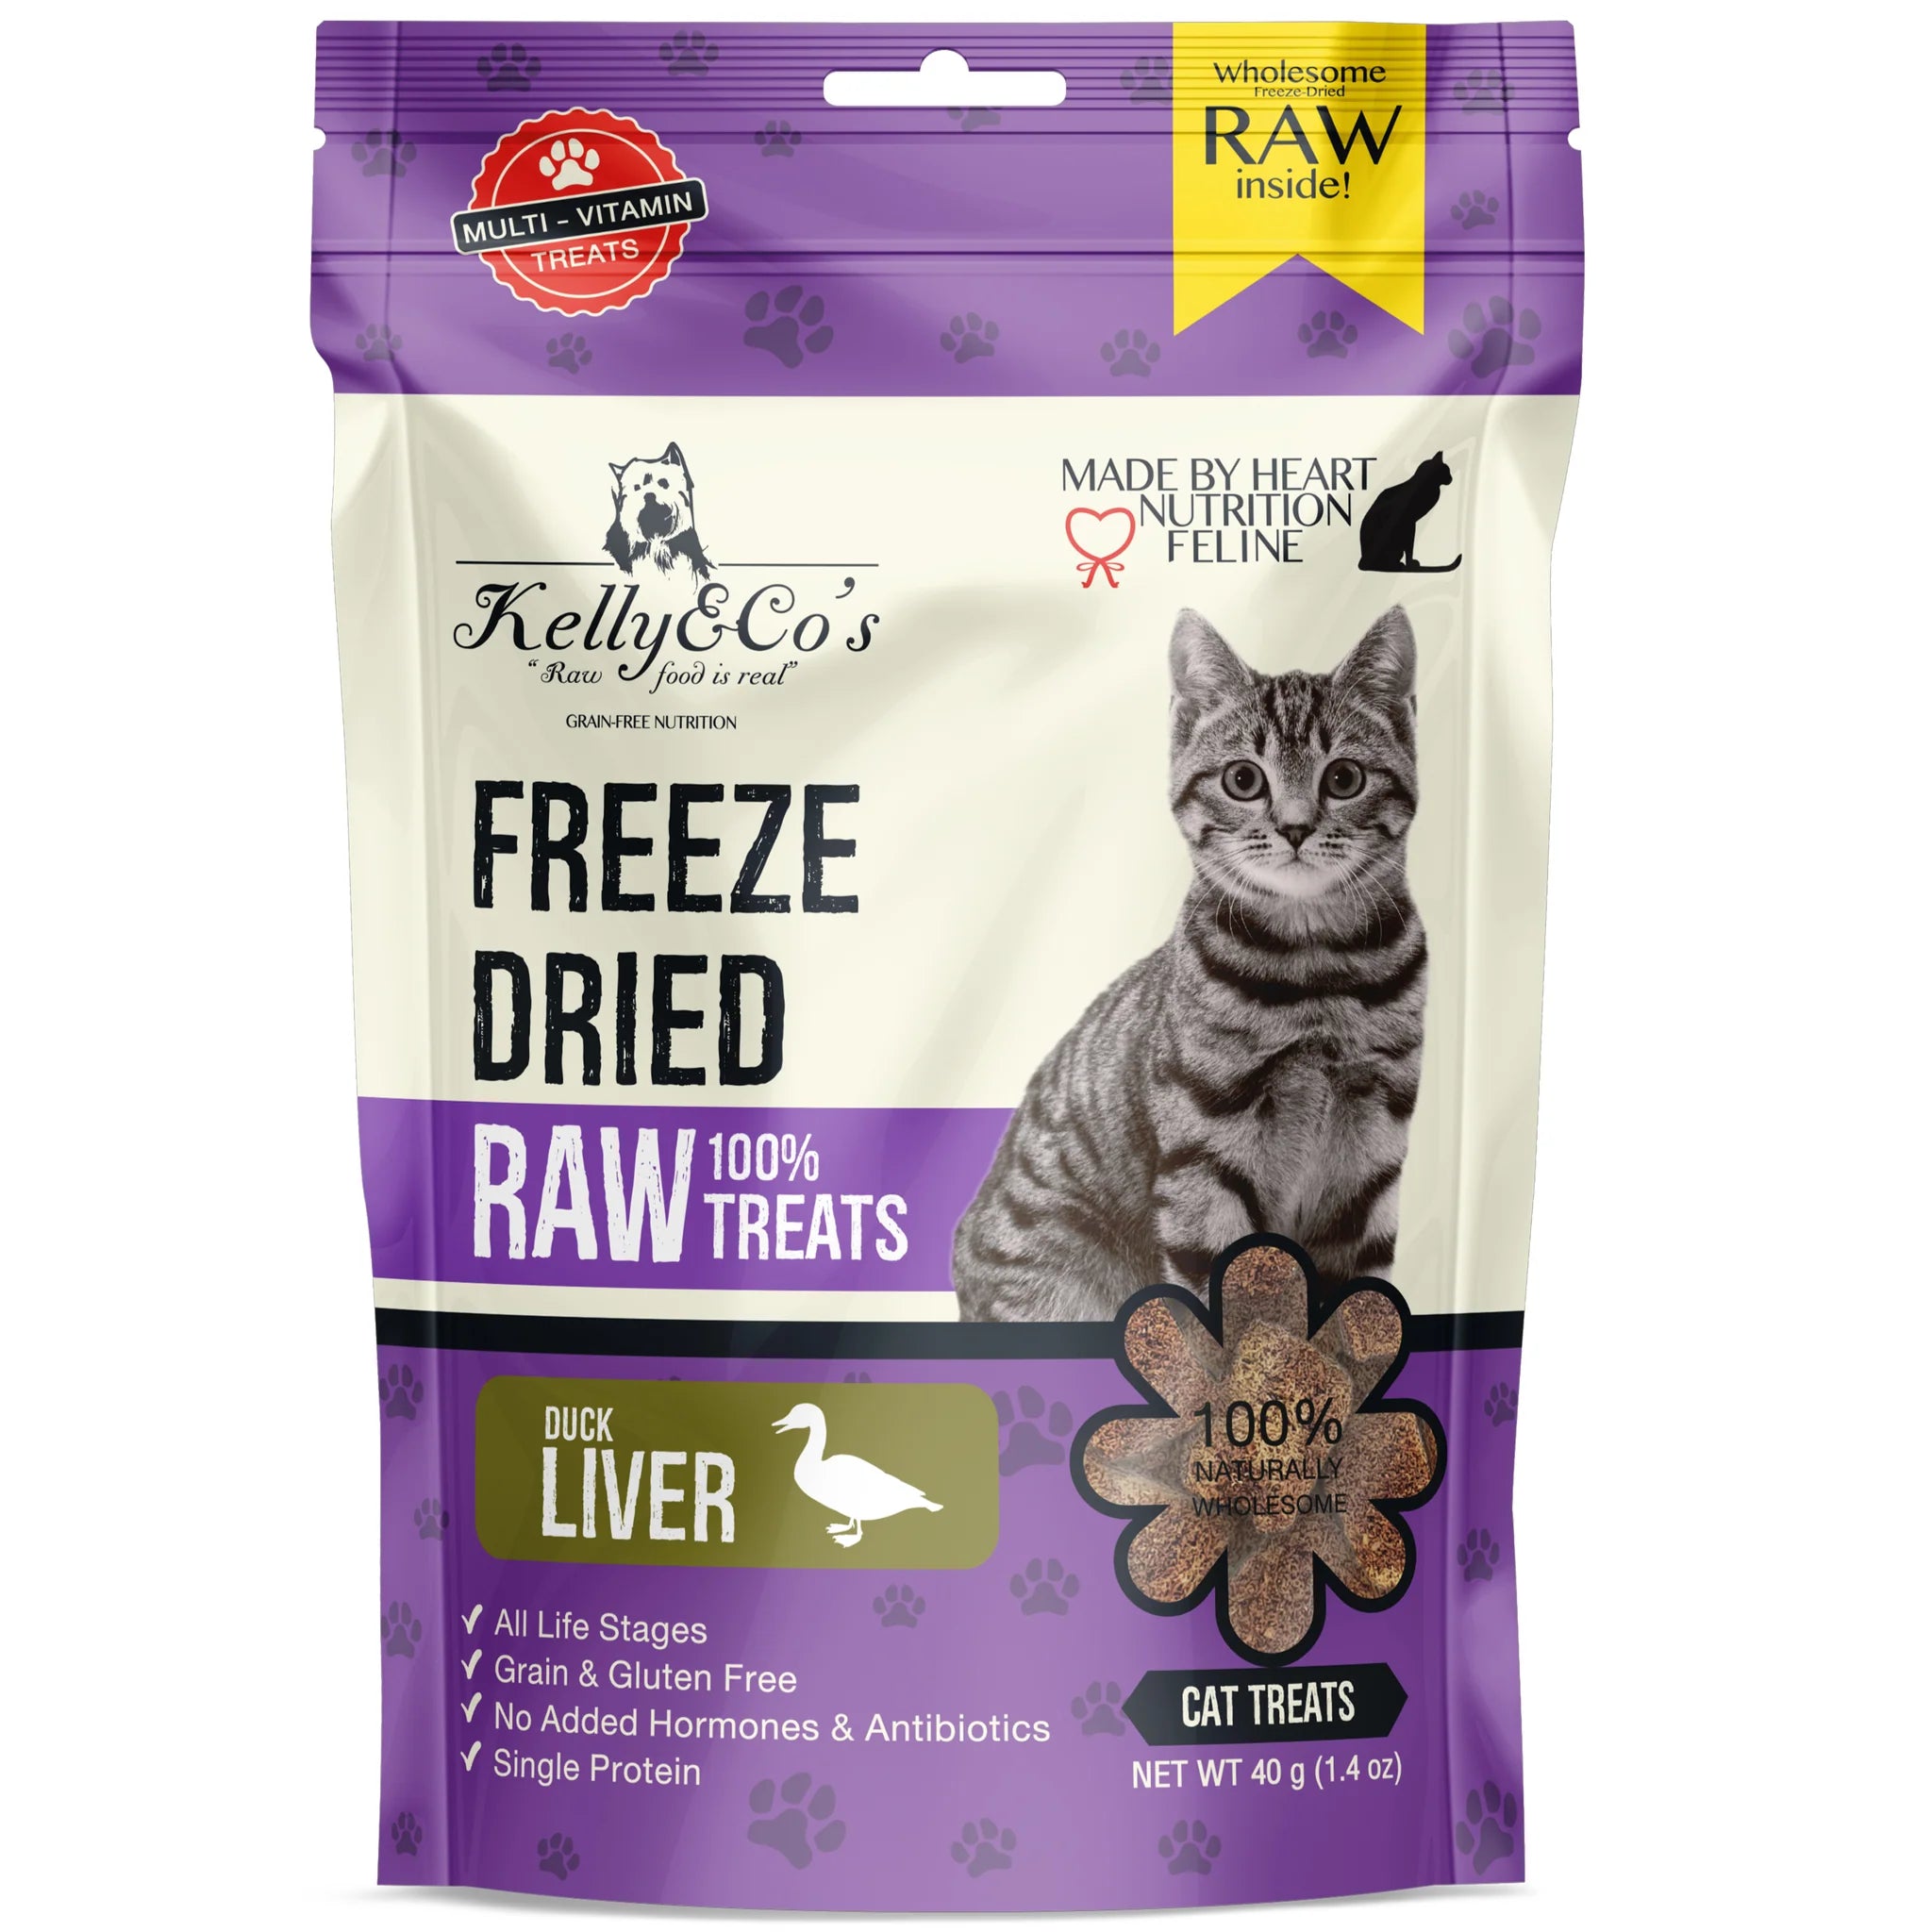 KELLY & CO’S Single Ingredient Freeze-dried Duck Liver for Cat - 40g